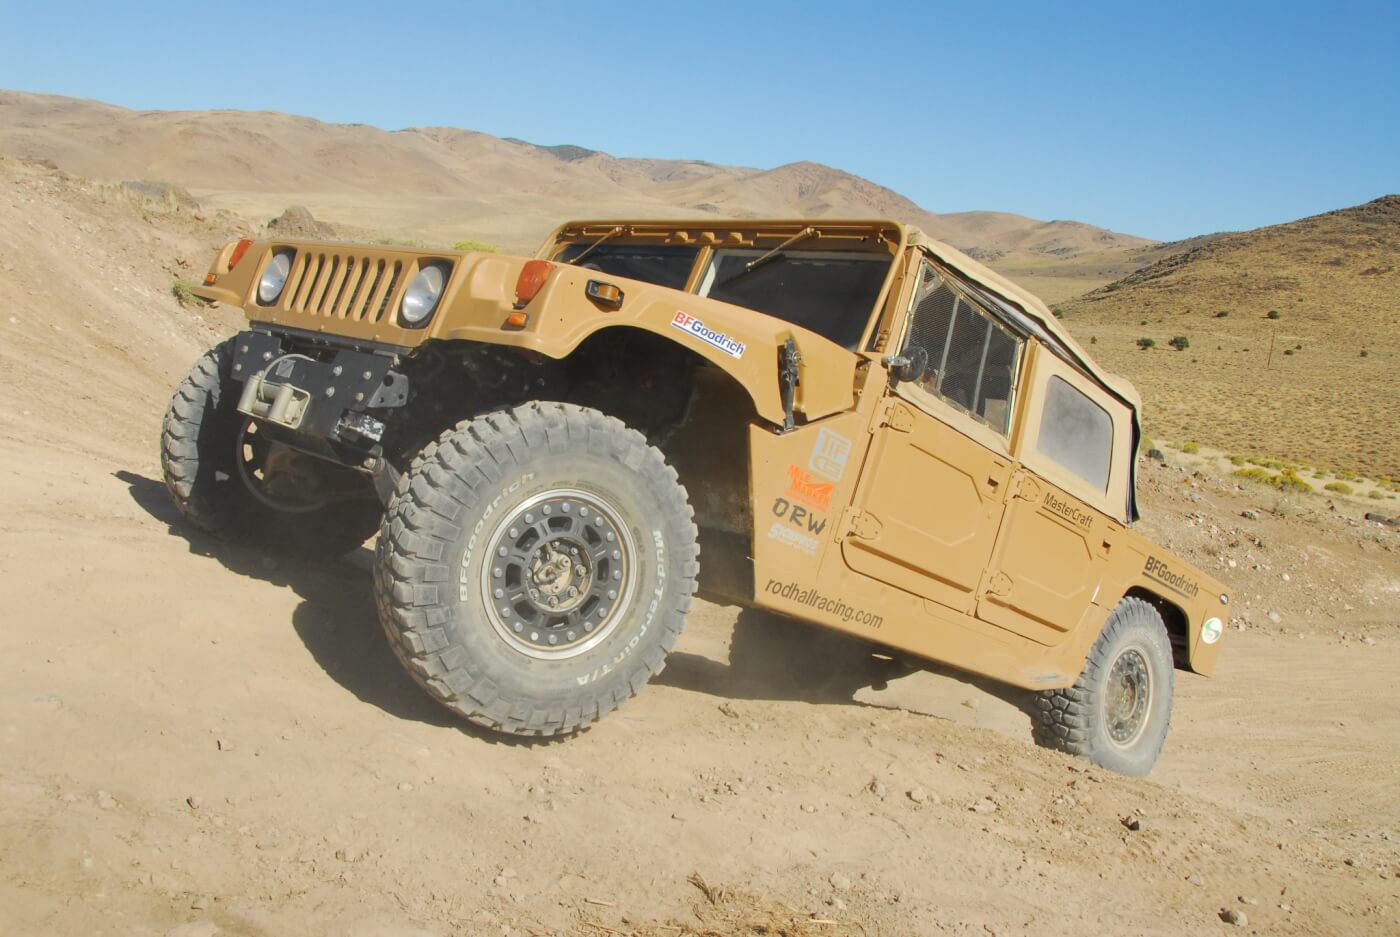 Some action in the dirt with Rod Hall’s GDiesel-fueled Humvee at his off-road school east of Reno.